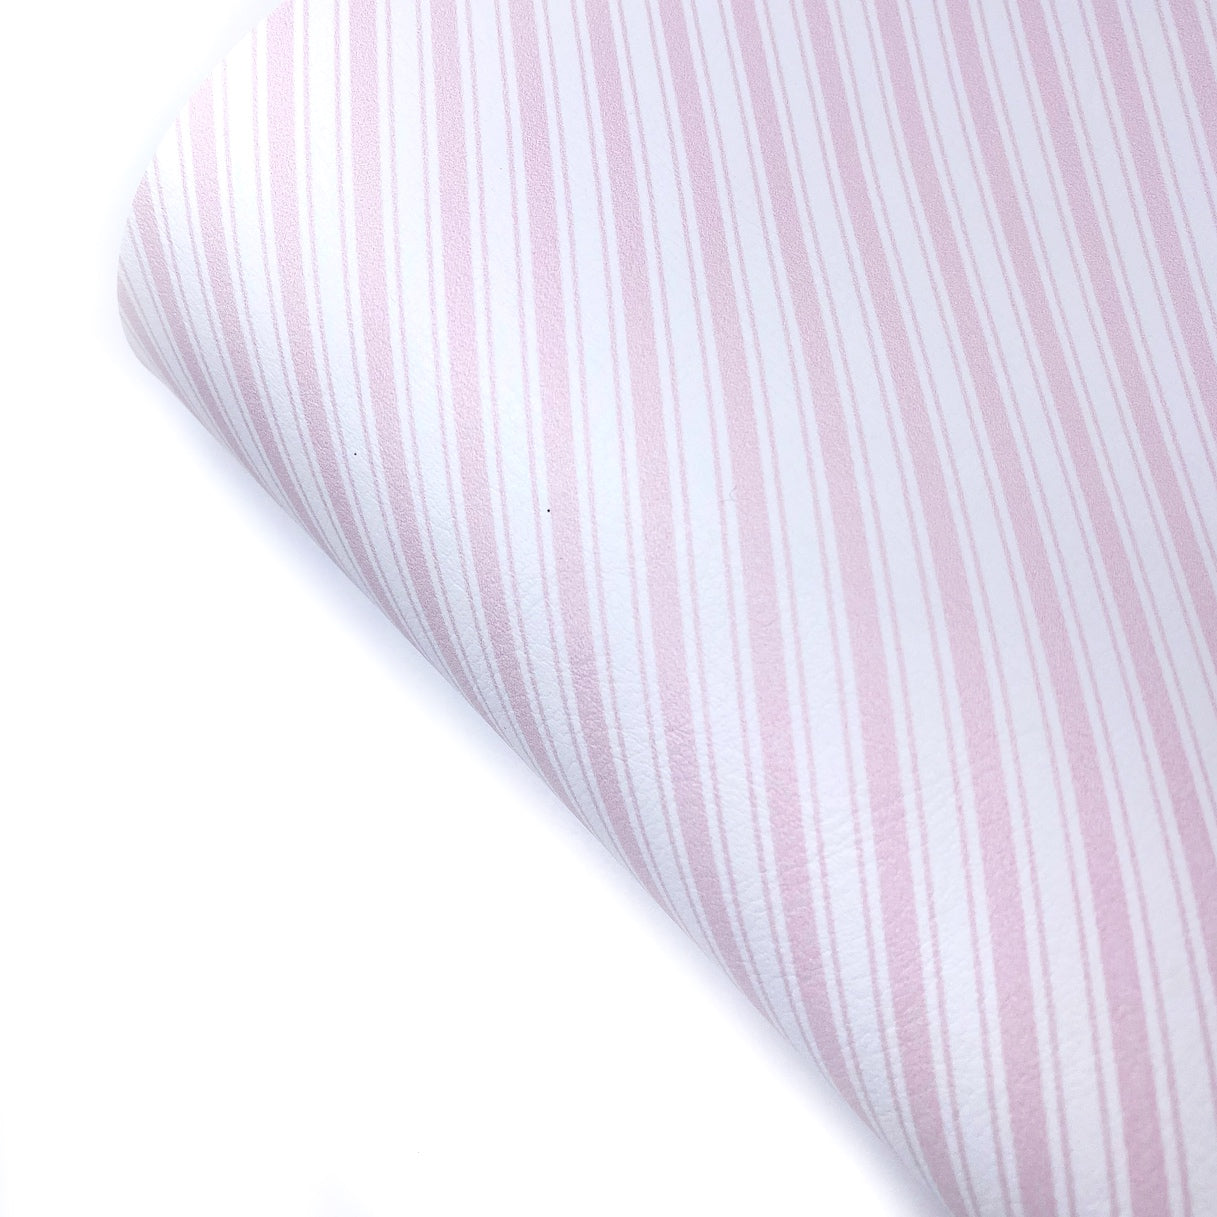 Candy Cane Pink Premium Faux Leather Fabric Sheets